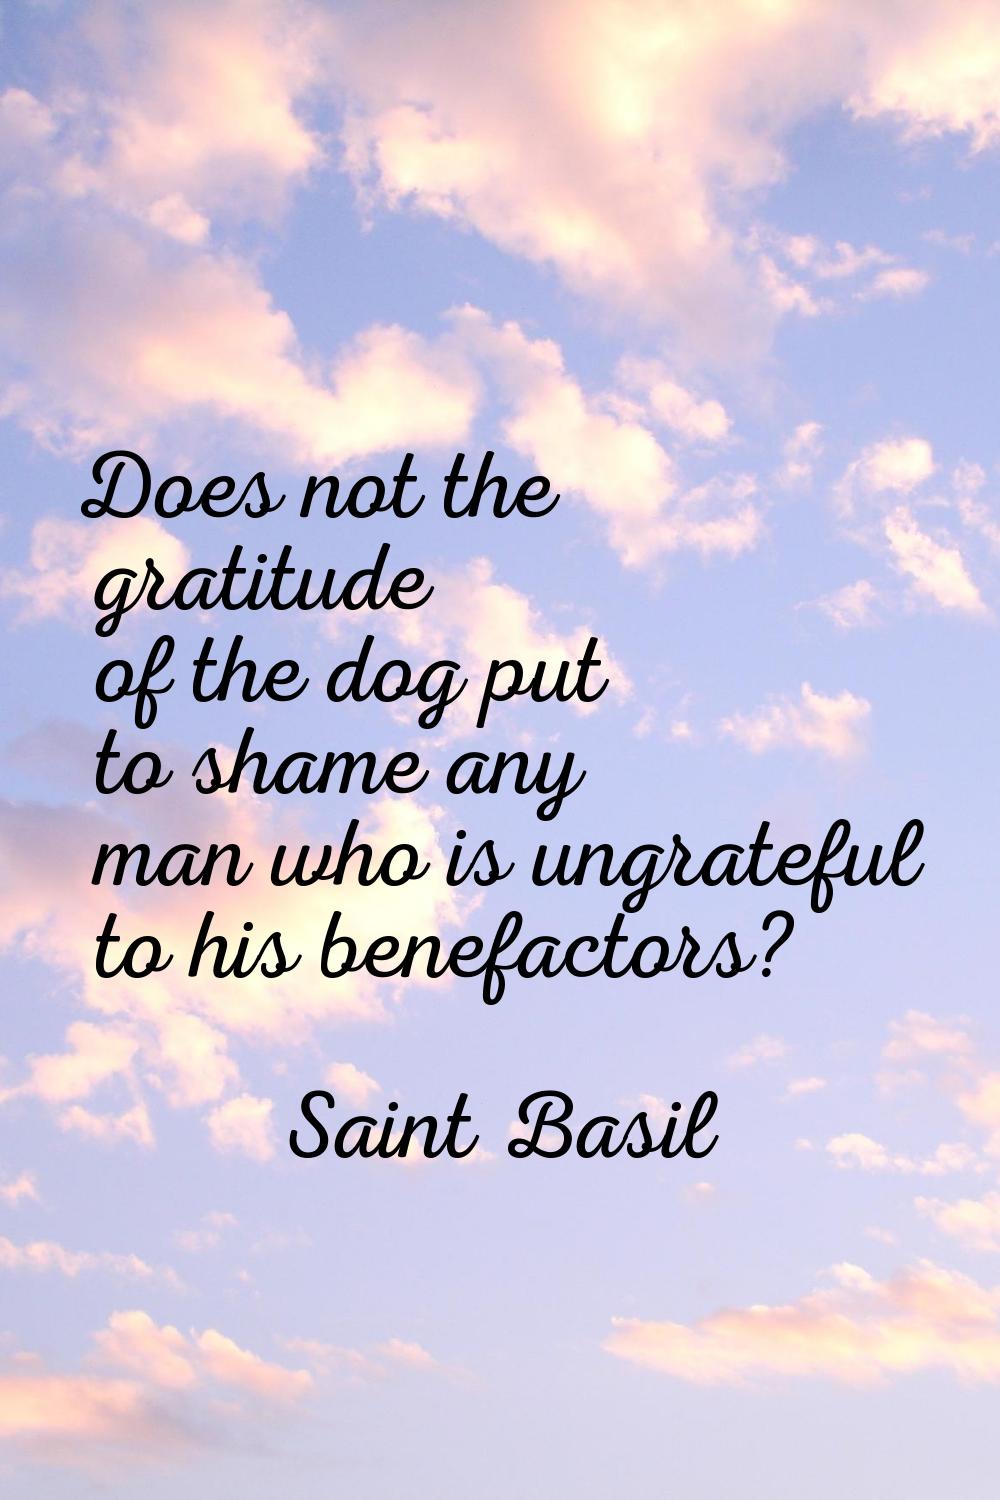 Does not the gratitude of the dog put to shame any man who is ungrateful to his benefactors?